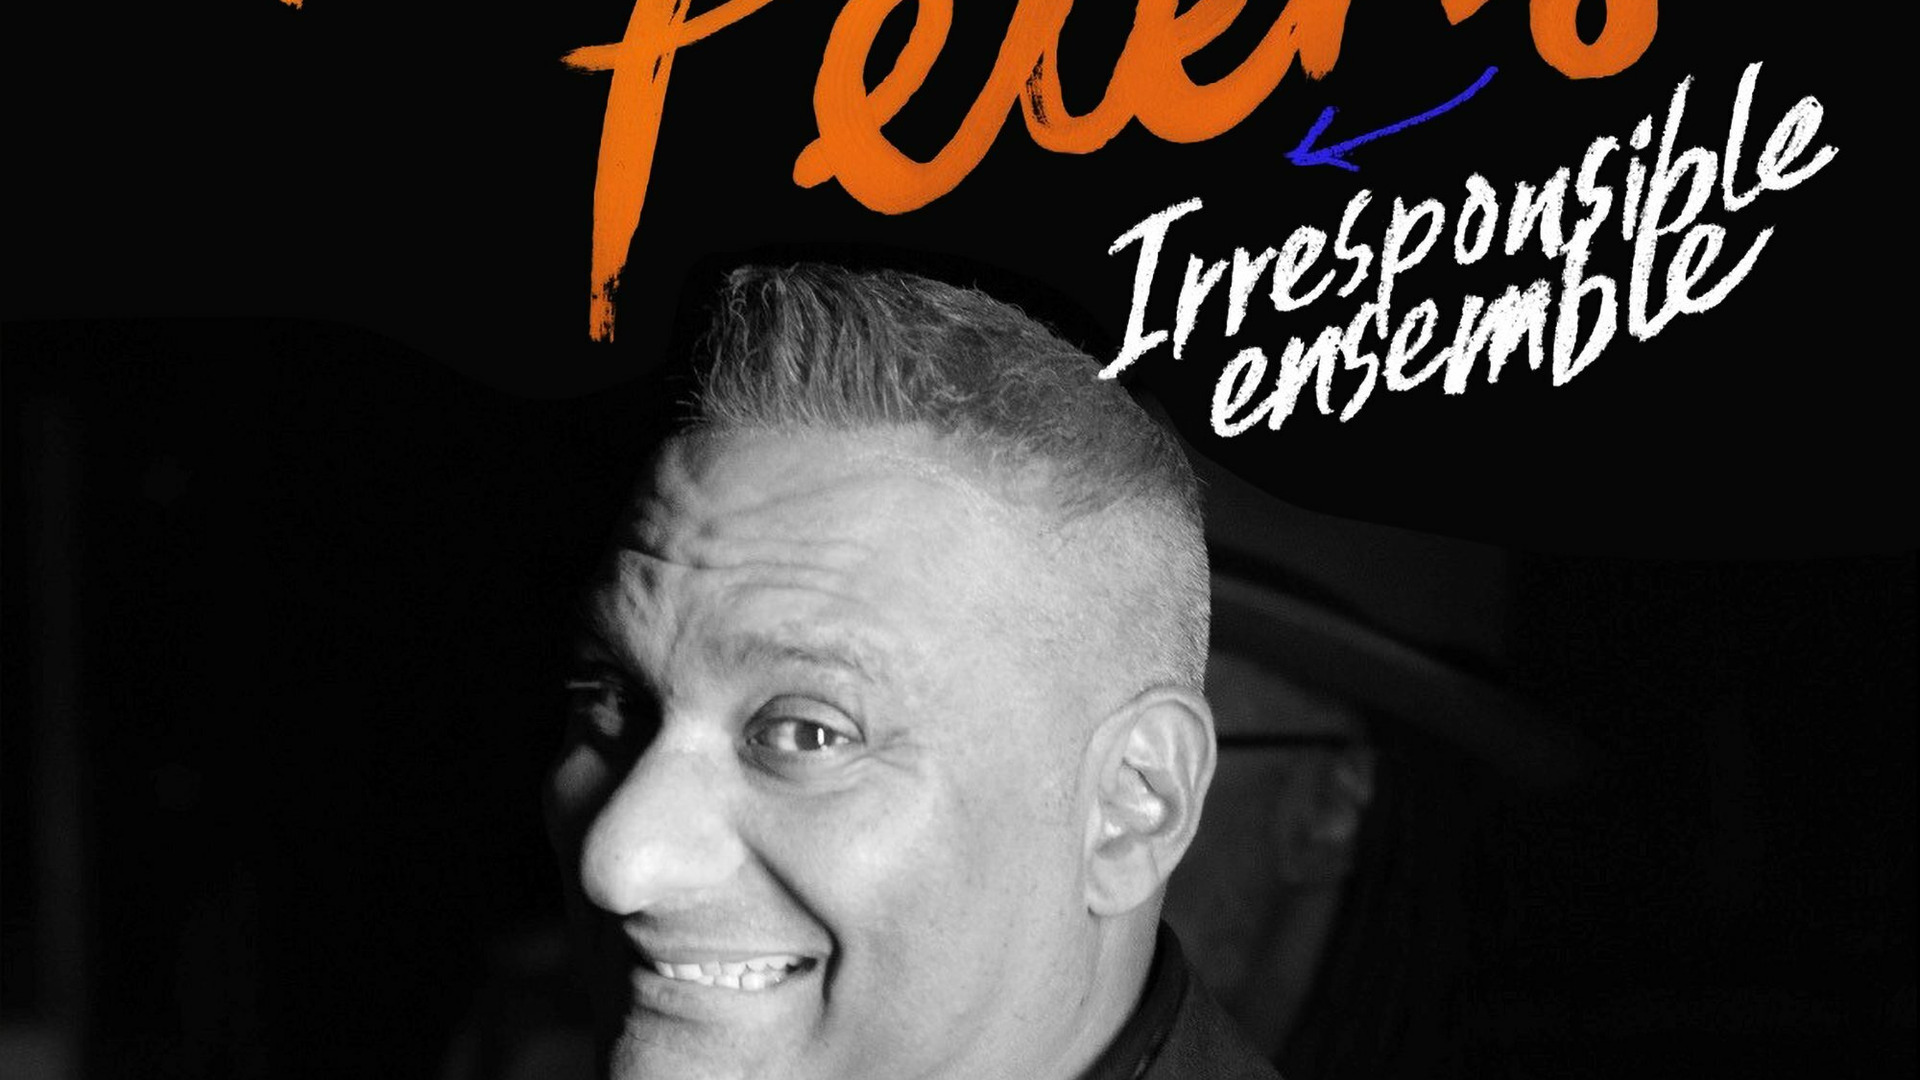 Show Russell Peters: Irresponsible Ensemble